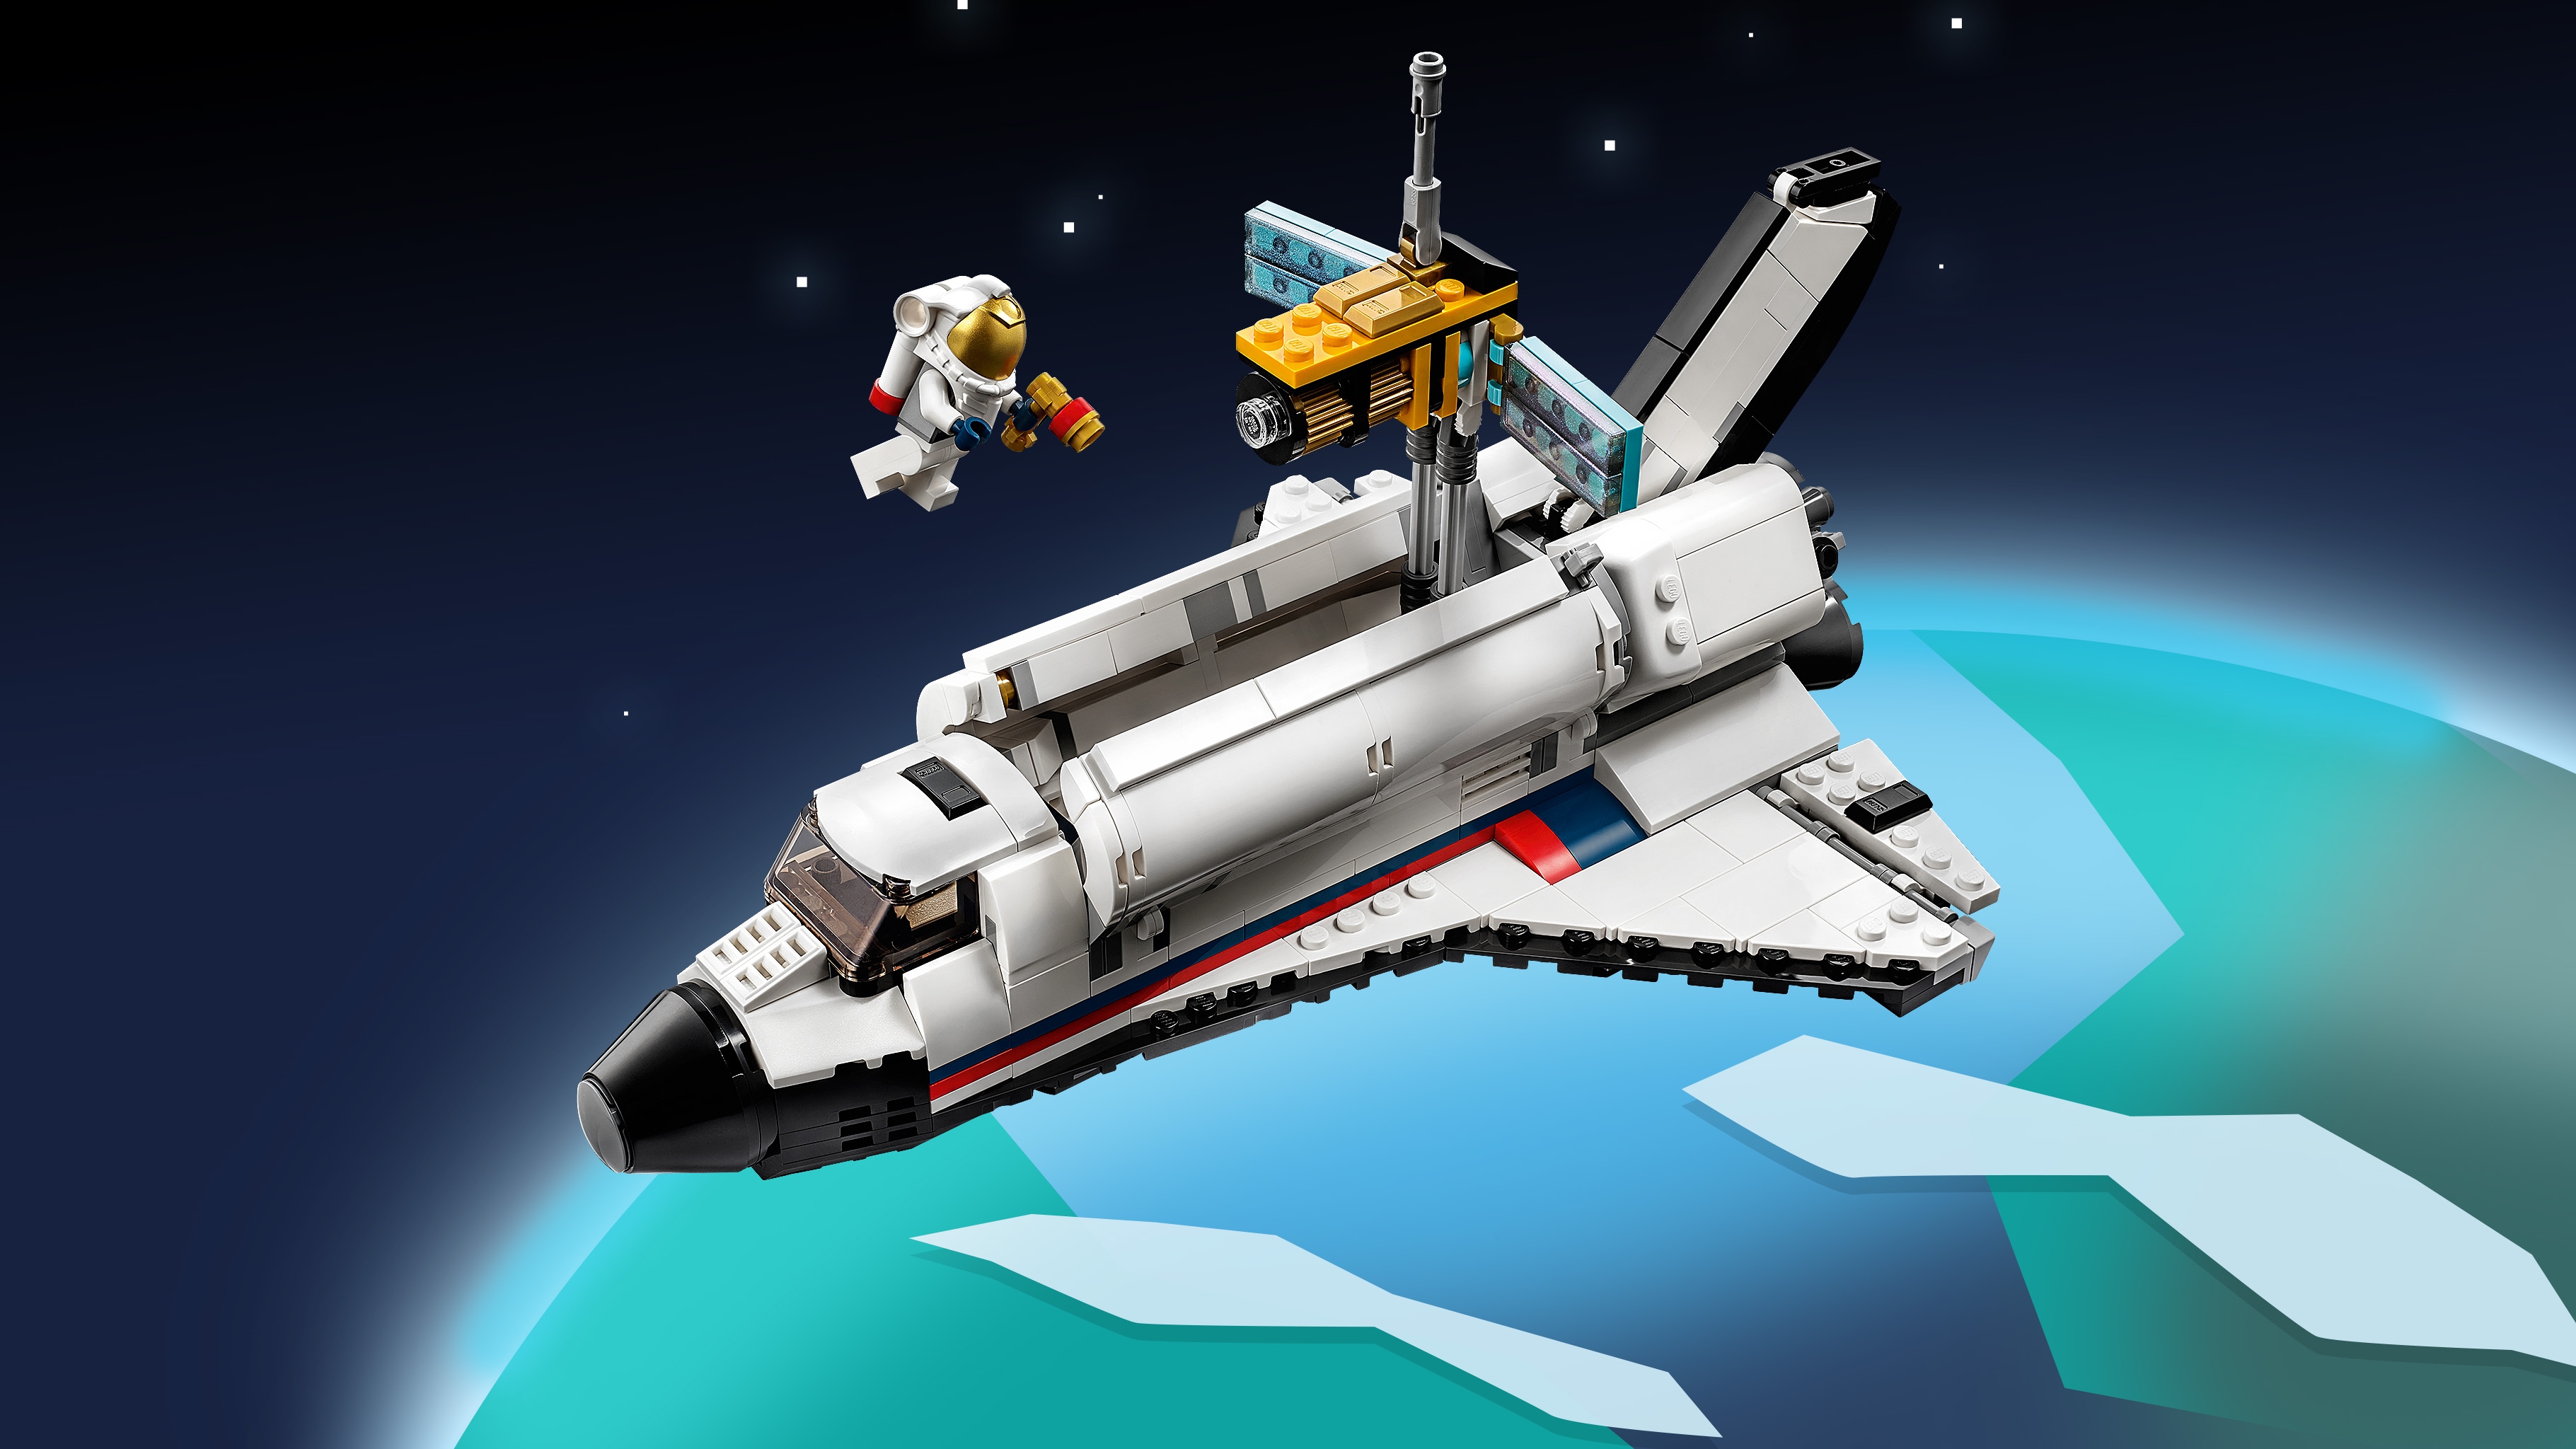 Space Shuttle Adventure 31117 - LEGO® Creator Sets  for kids